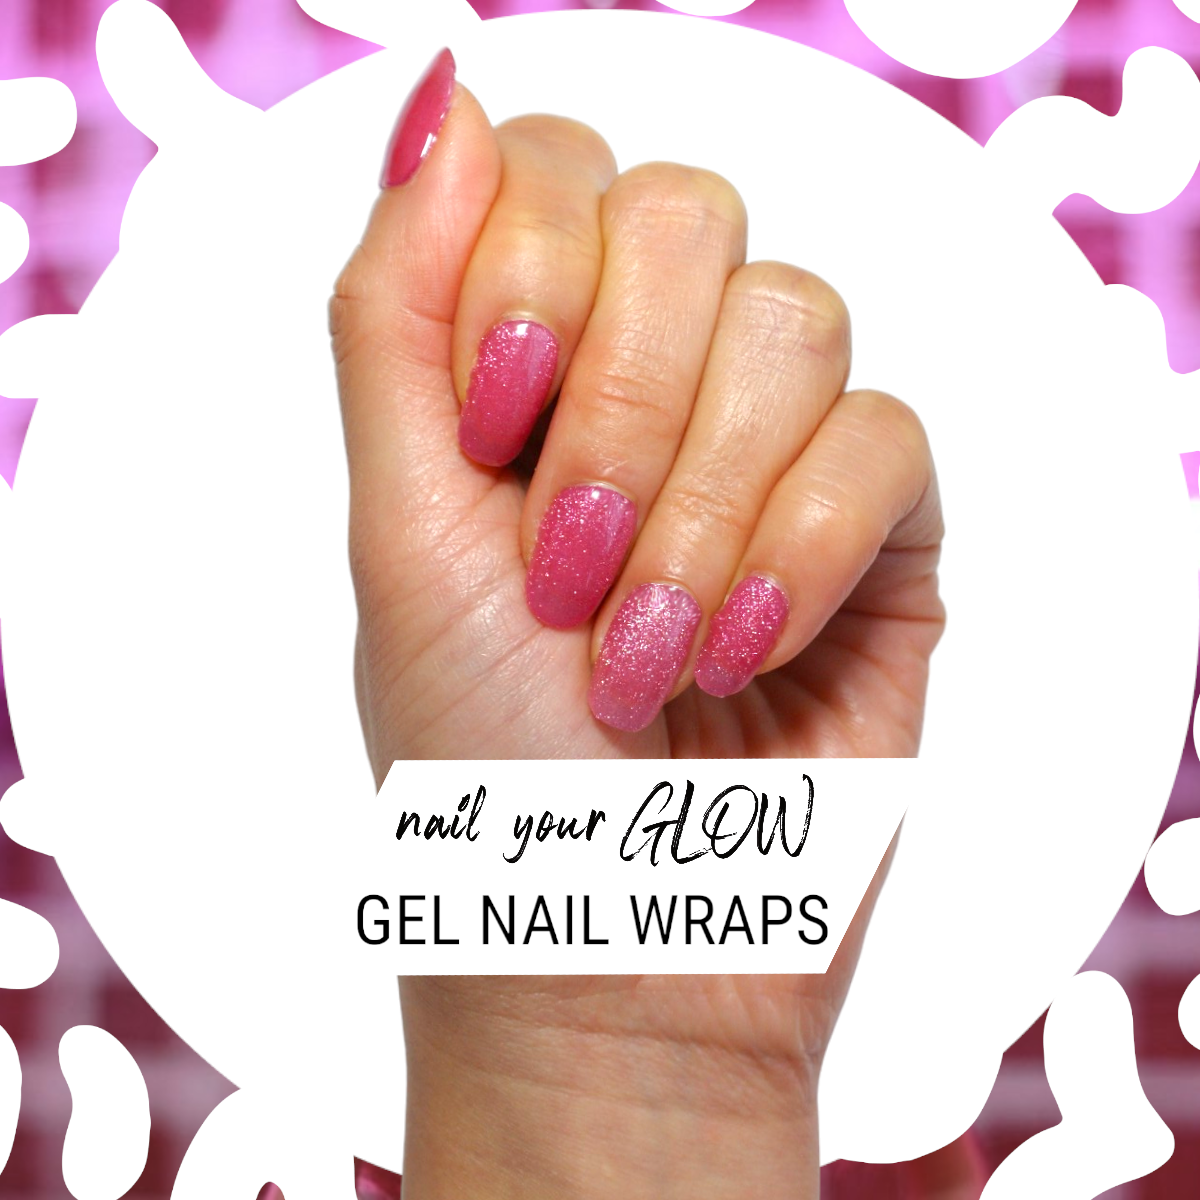 PINK POSITIVELY - 20 Gel Nail Wraps by Nail Your GLOW (Pink Glitter)